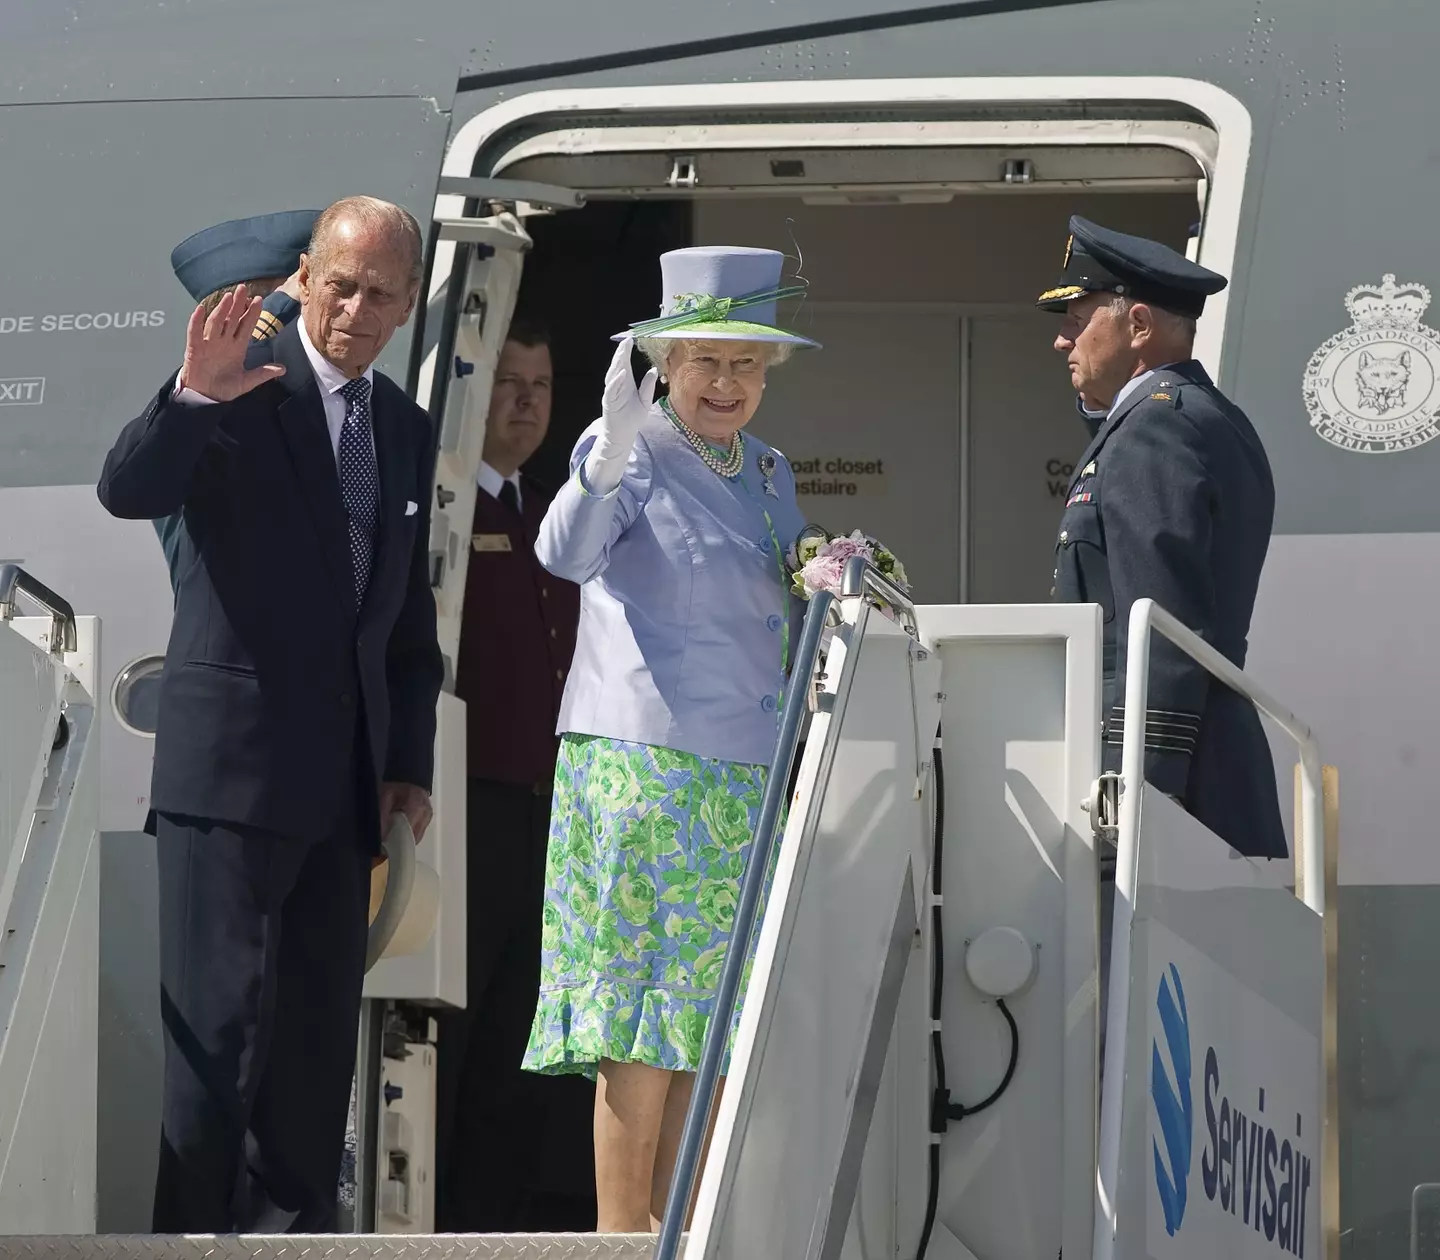 The Queen took her final flight before being laid to rest alongside her husband in a few day's time.